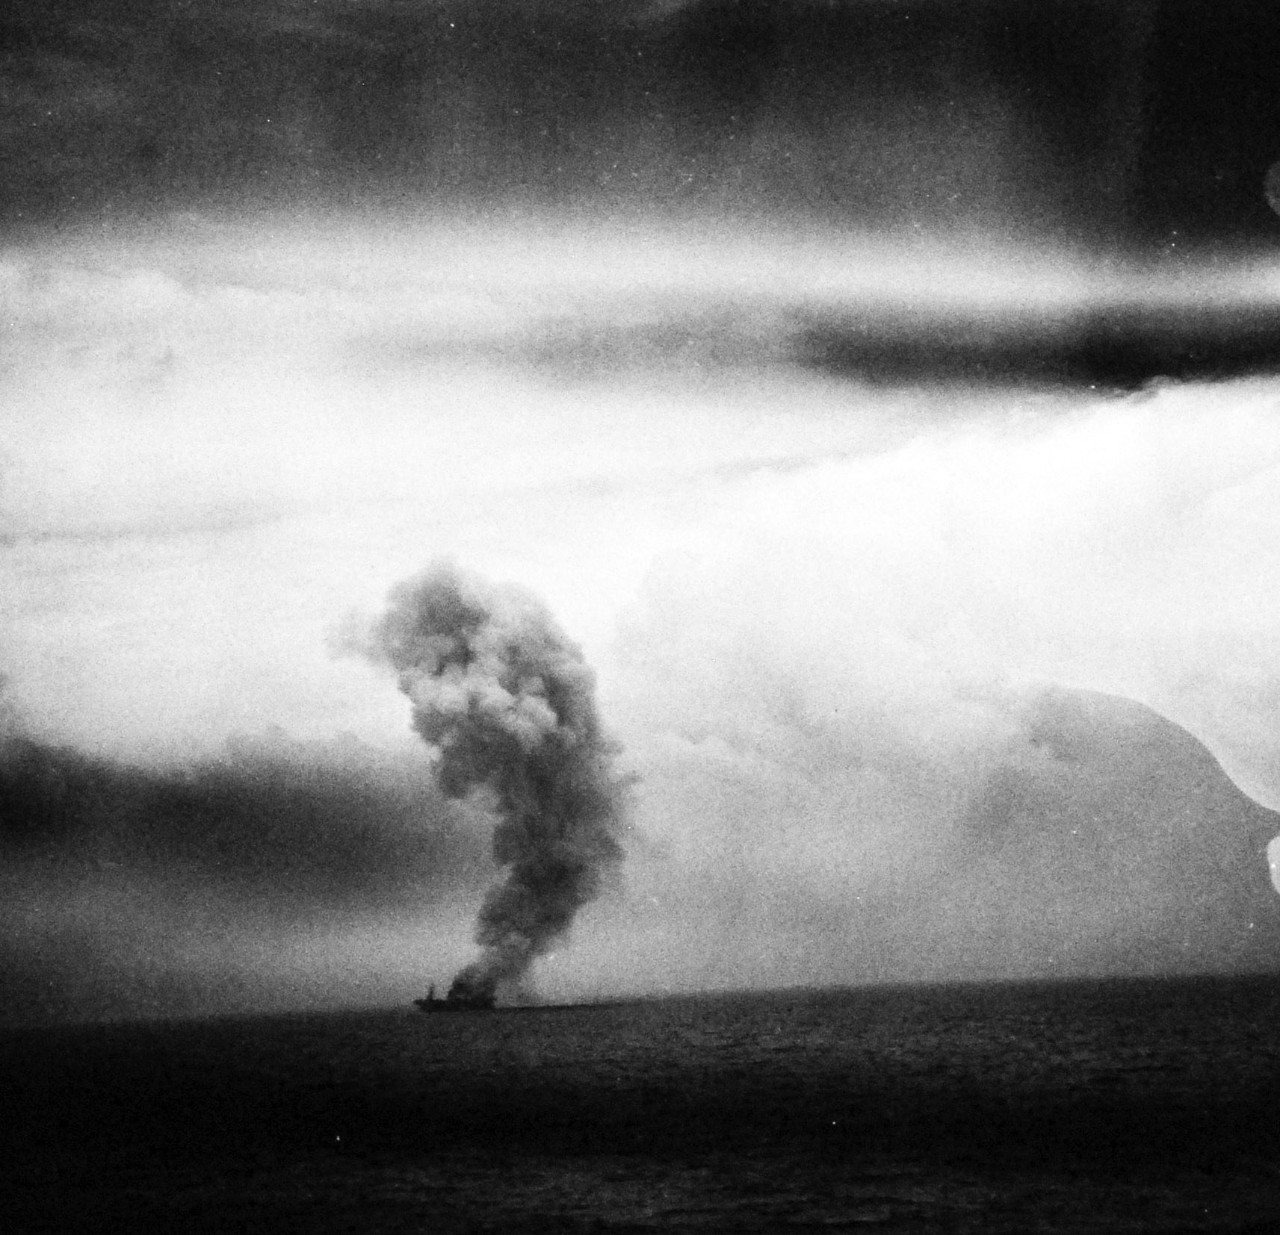 80-G-287510:  USS St. Lo (CVE-63), October 25, 1944.  St. Lo burning after Japanese fighter makes suicide dive onto the flight deck during the Battle of Leyte Gulf.  As seen from USS Kitkun Bay (CVE-71).  Official U.S. Navy photograph, now in the collections of the National Archives.  